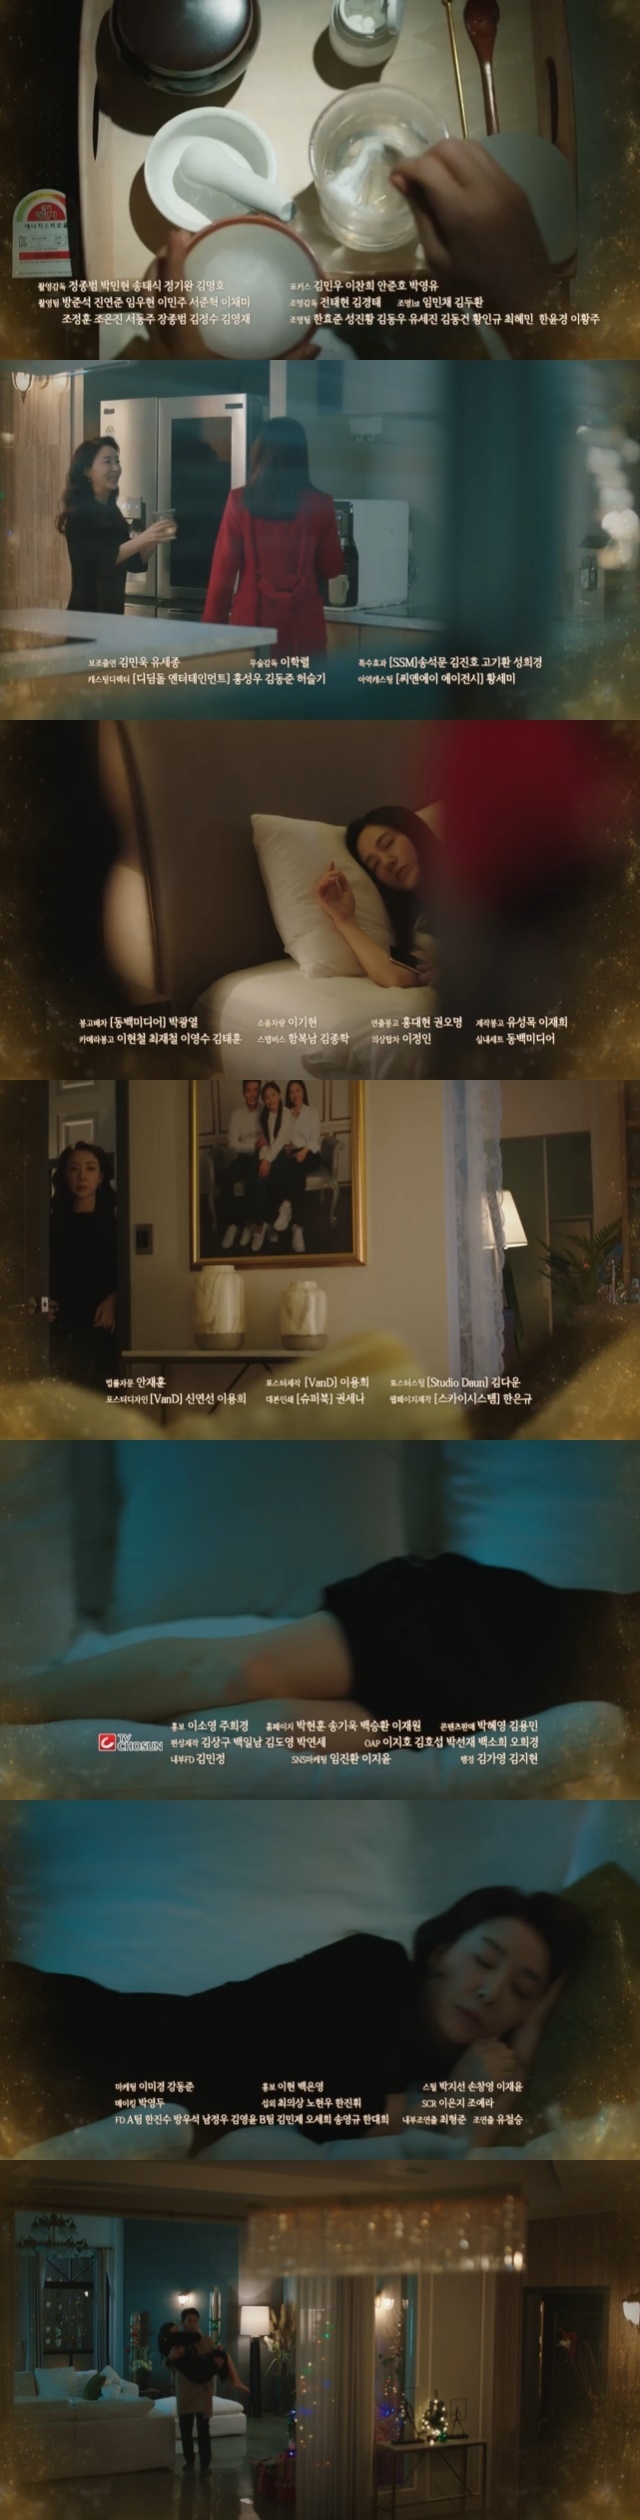 After Kim Bo-yeon put Daughter-in-law Park Joo-Mi to sleep with Hypnotic, he Temptated his son Lee Tae-gon.In the fifth episode of TV Chosun Saturday Drama Marriage Writer Divorce Composition 2 (Im Sung-han), directed by Yoo Jung-jun, Lee Seung-hoon), which was broadcast on June 26, Kim Dong-mi (Kim Bo-yeon), who continues his black heart about his newborn son, Lee Tae-gon, was portrayed.On this day, Kim dong-mi played a friendly and good mother-in-law cosplay in front of Daughter-in-law Safiyoung (Park Joo-Mi), and continued to grow black heart inside.Kim dong-mi thought alone that he was laughing at the sound of the affectionate affection of Shin Yu-shin and Safi Young flowing through the door of the house.In the trailer, Kim Dong-mis plan began in earnest; Kim Dong-mi fed a large amount of suspicious drugs, which are believed to be Hypnotic, to Safiyoungs water.Then, when Safiyoung fell asleep in the bedroom, he lay on the couch in a short dress and pretended to fall asleep.